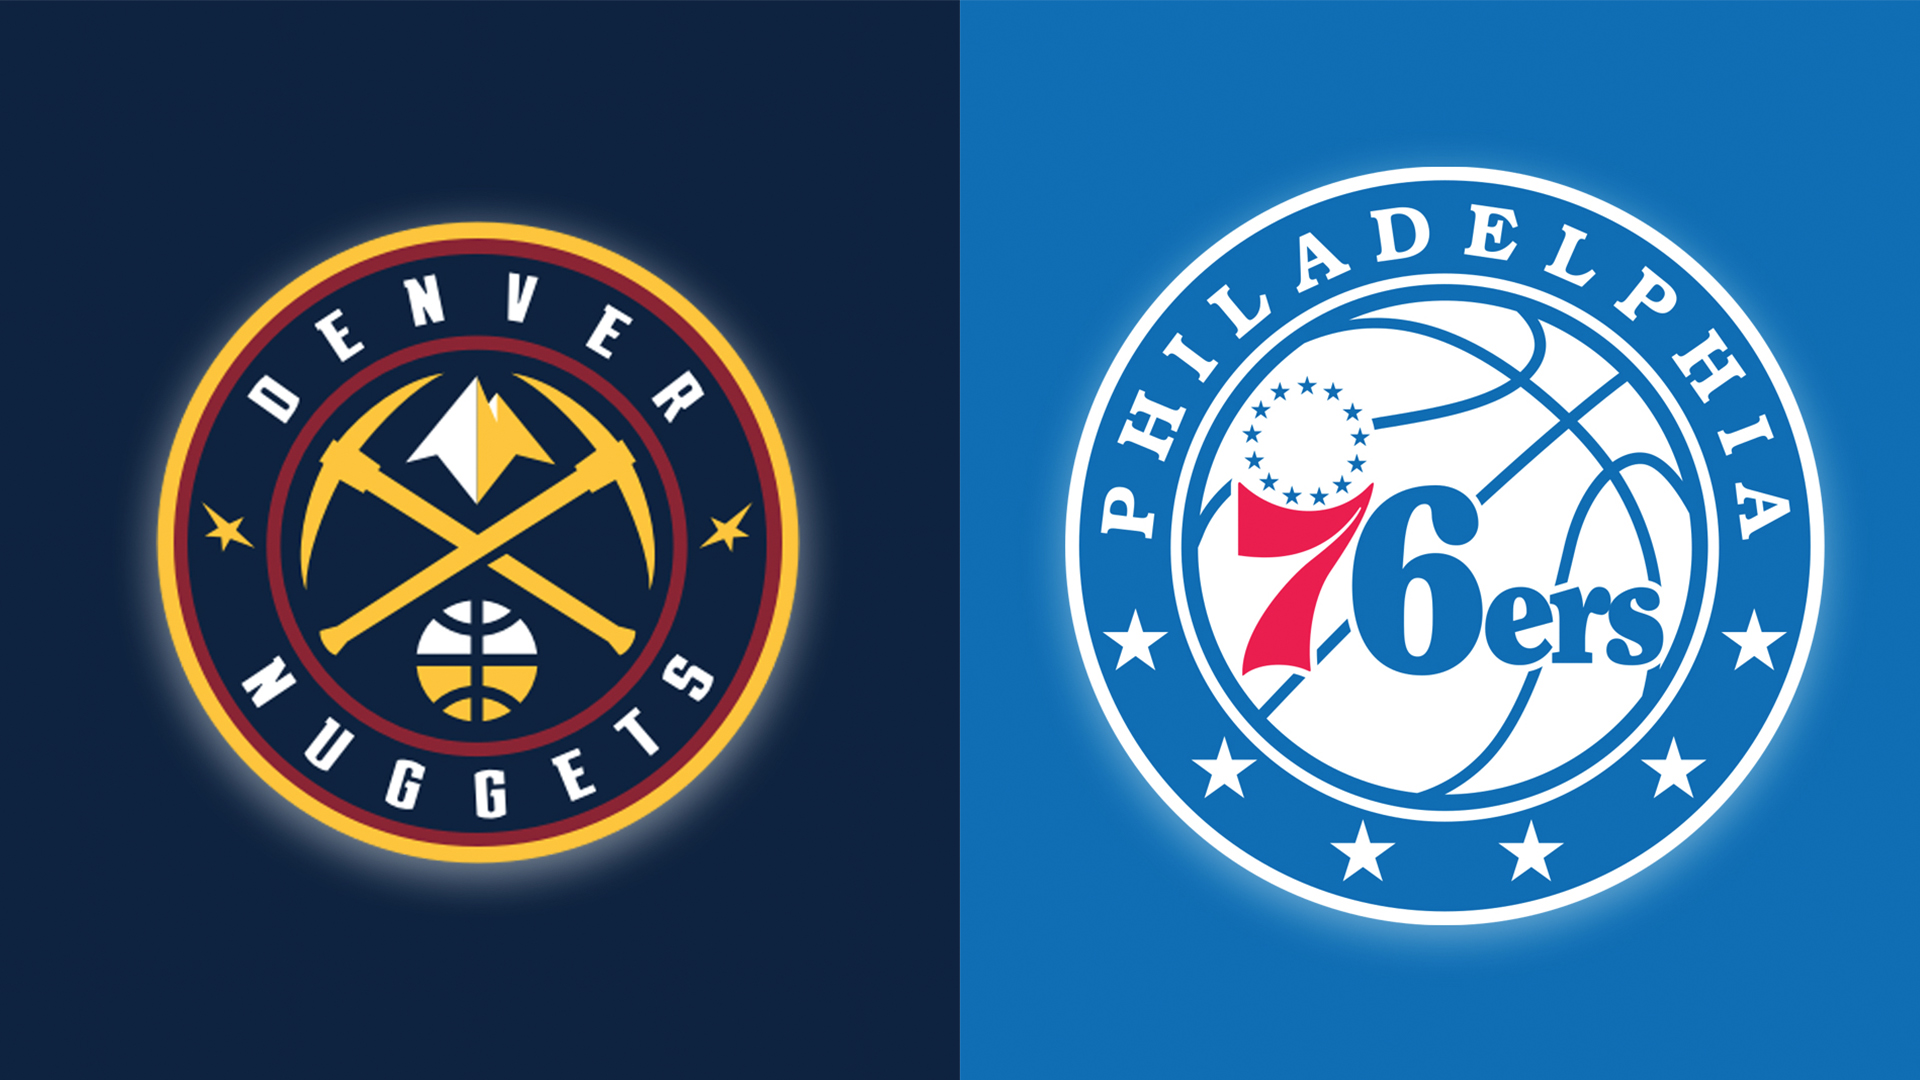 Preview 09/11/19 Nuggets face the Sixers in a meeting of toptier big